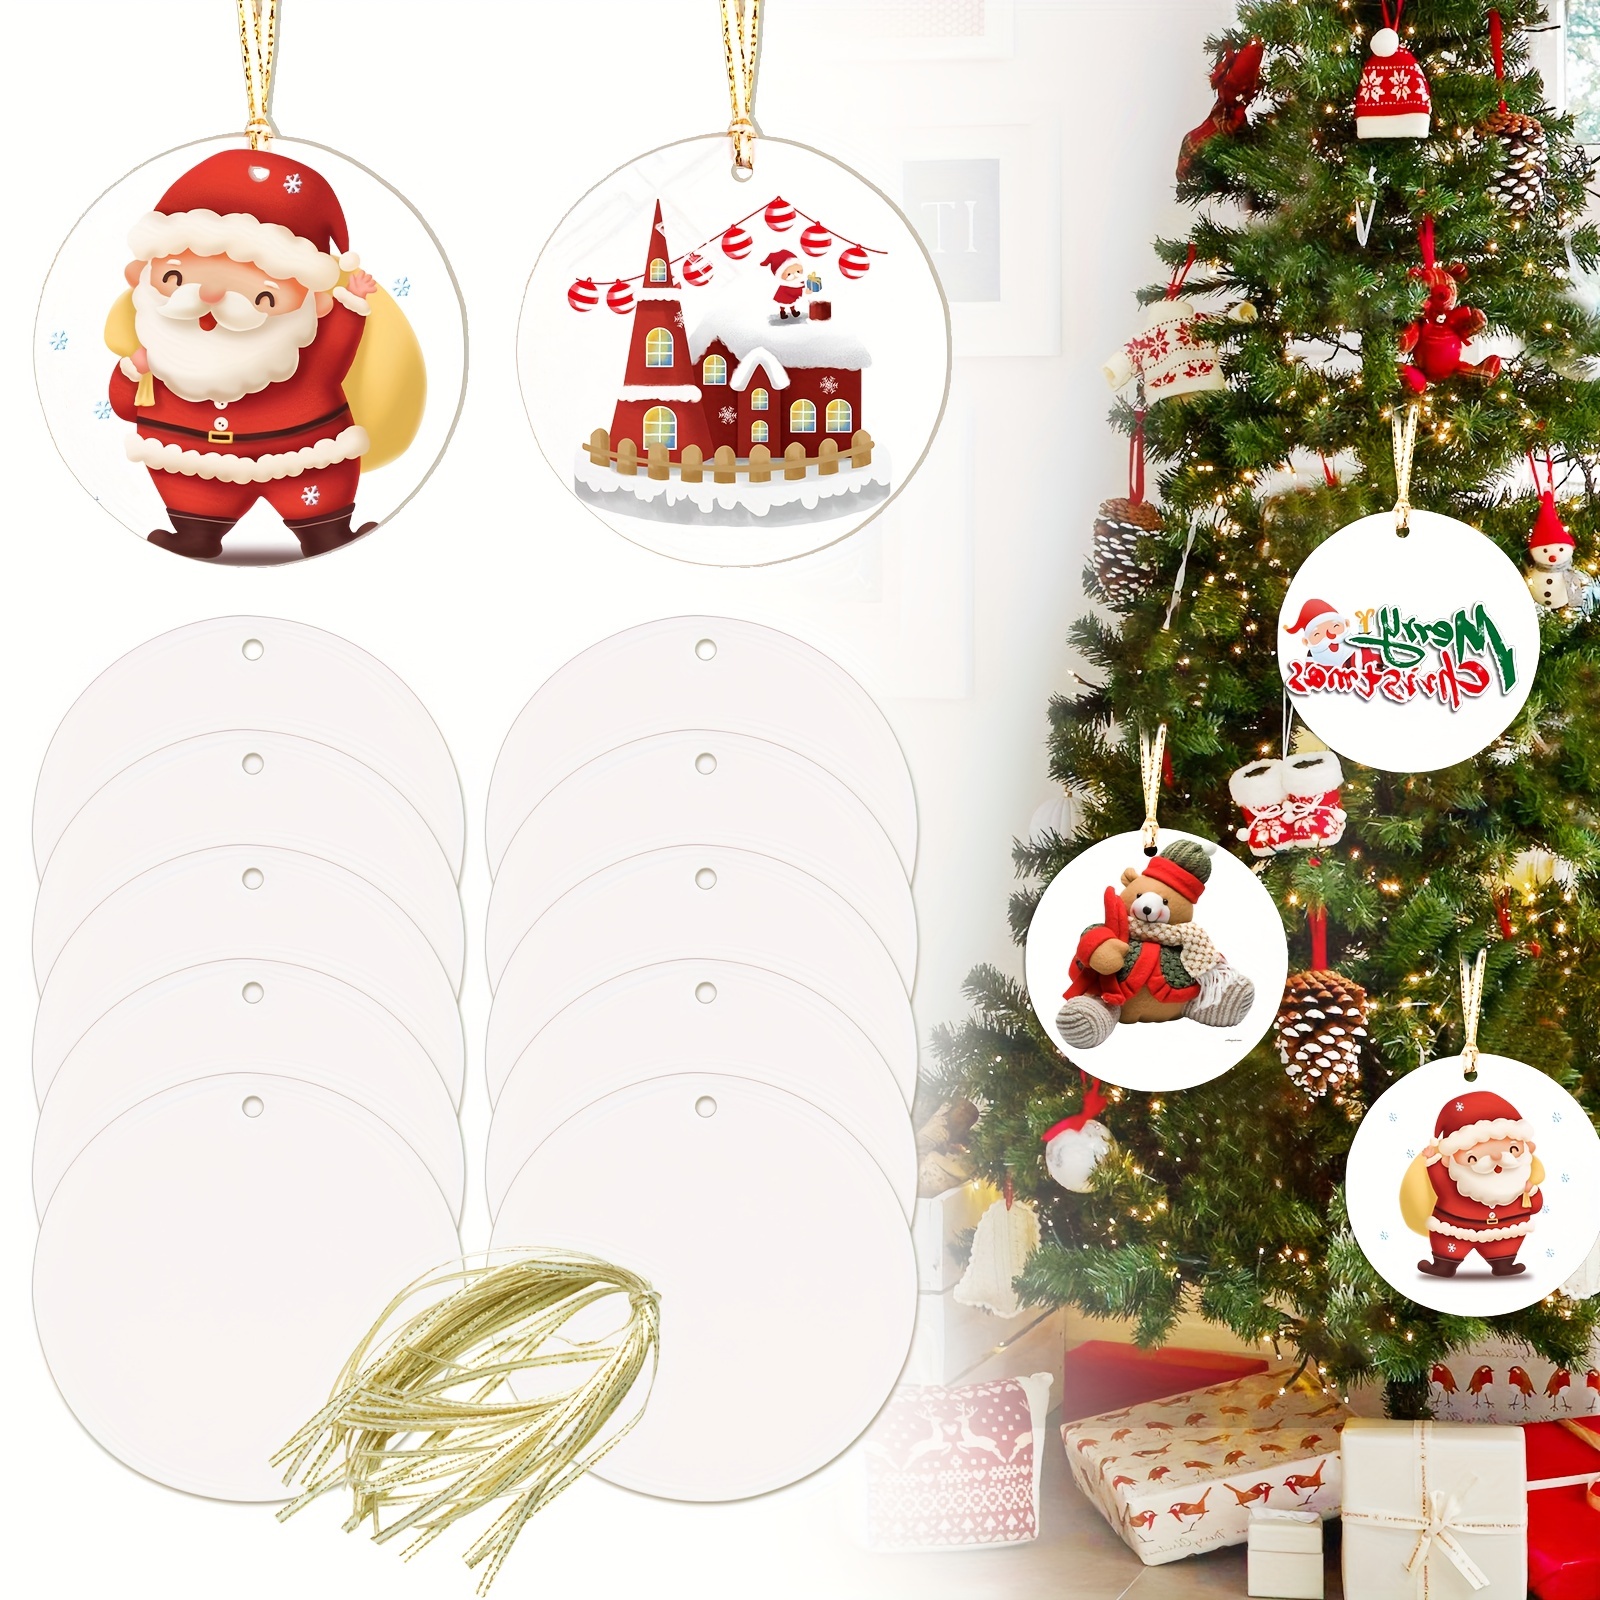 Ornament Sublimation blank - 2 sided